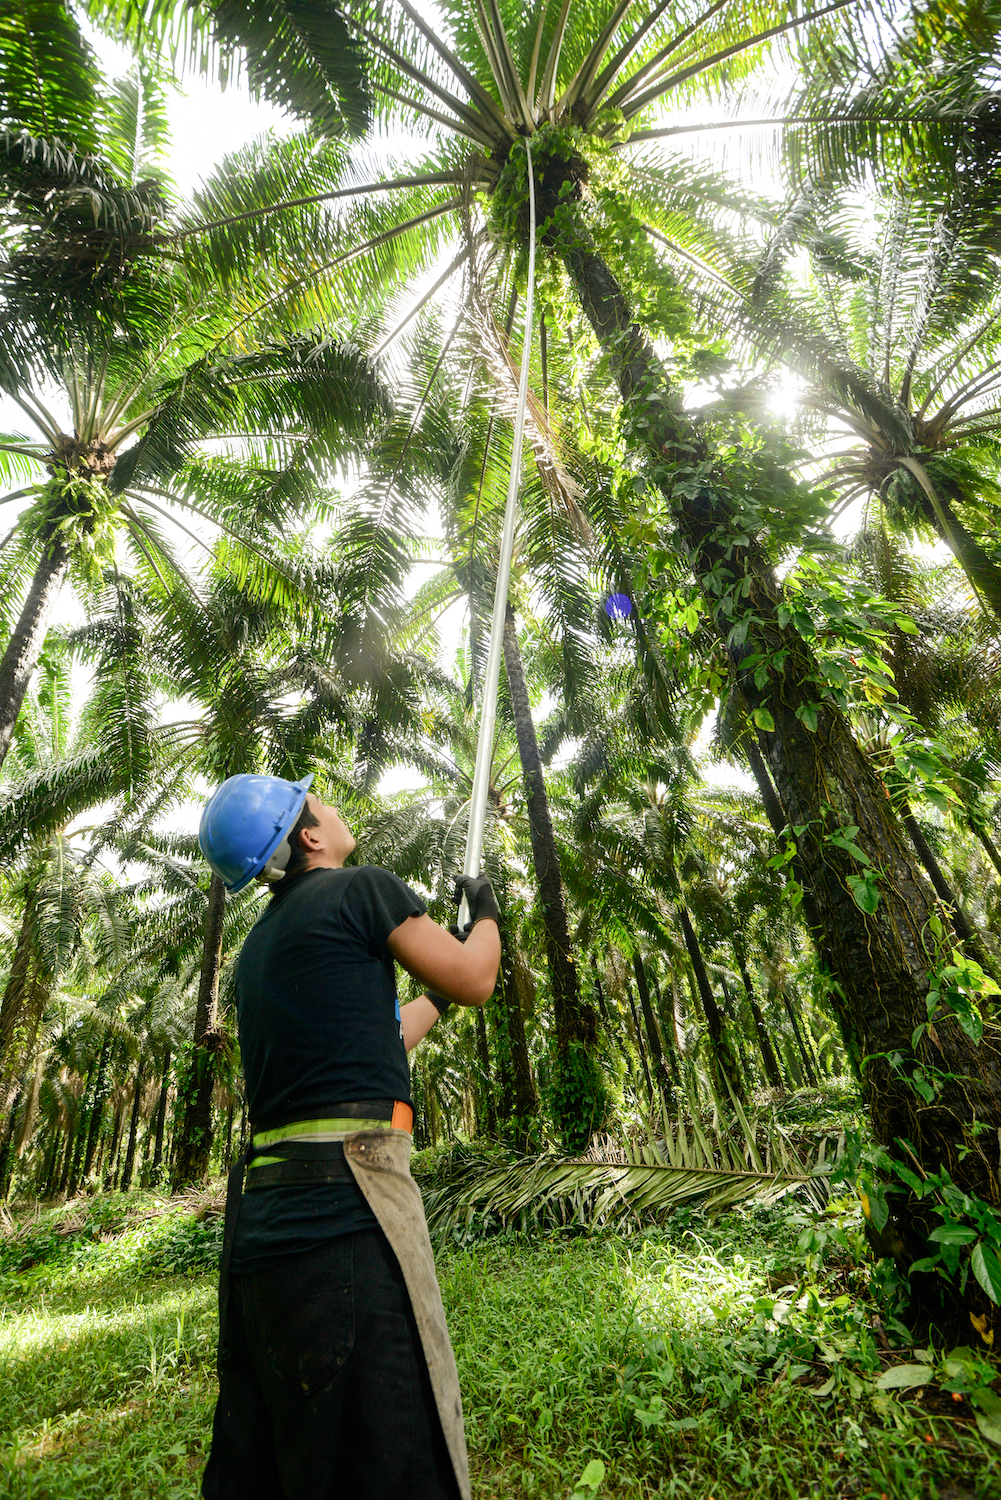 sustainable palm oil - palm oil farming